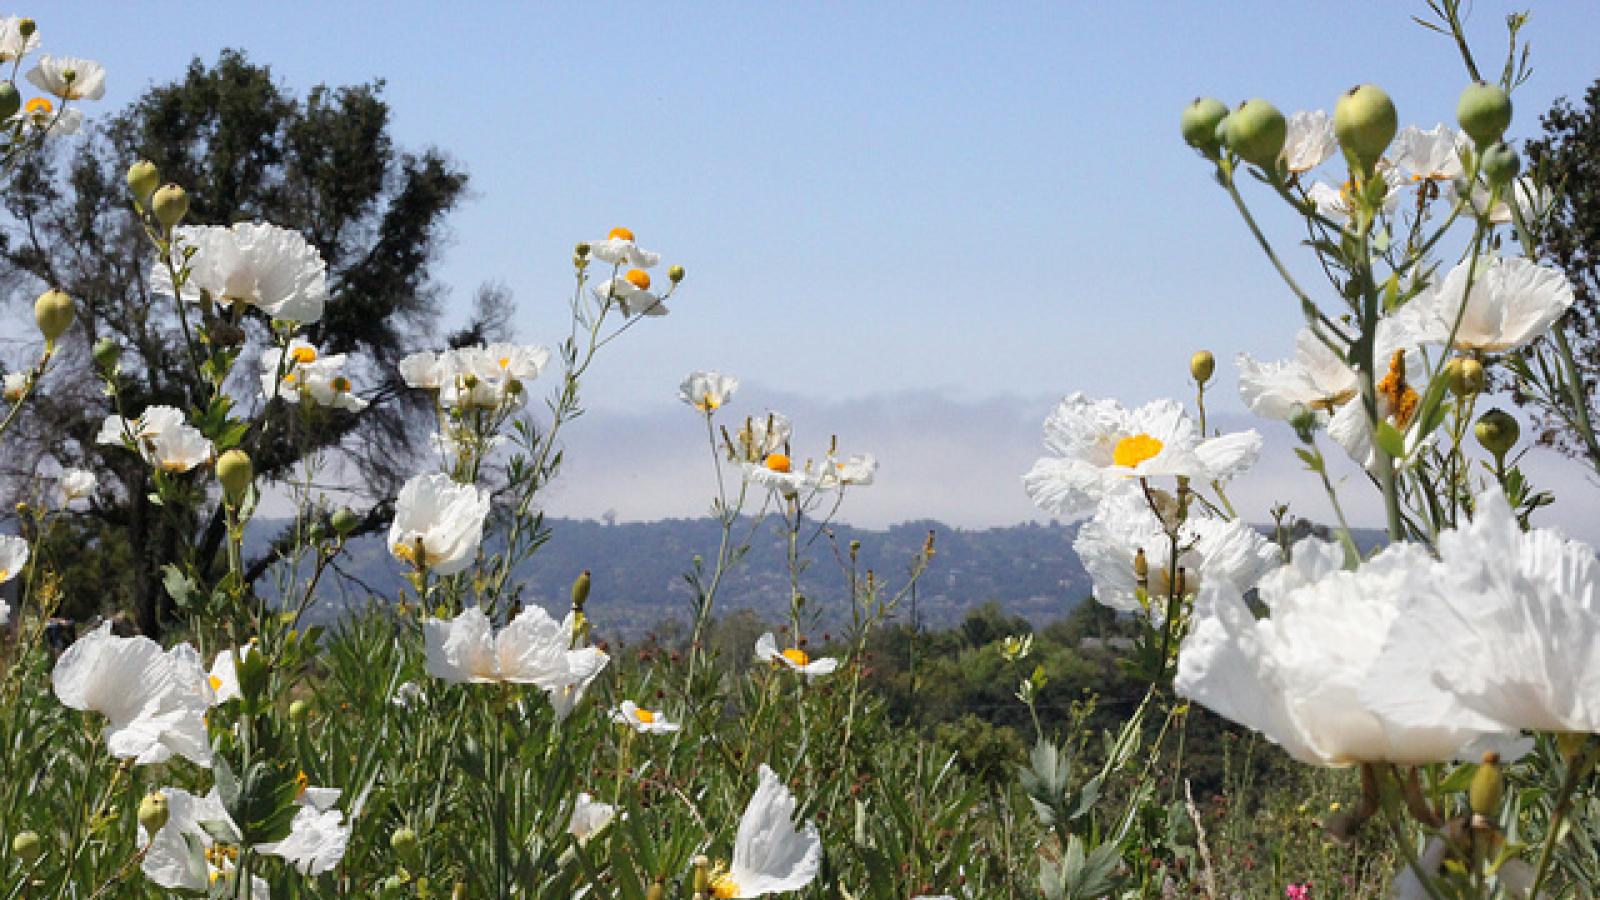 Close-up of white flowers in front of mountain backdrop